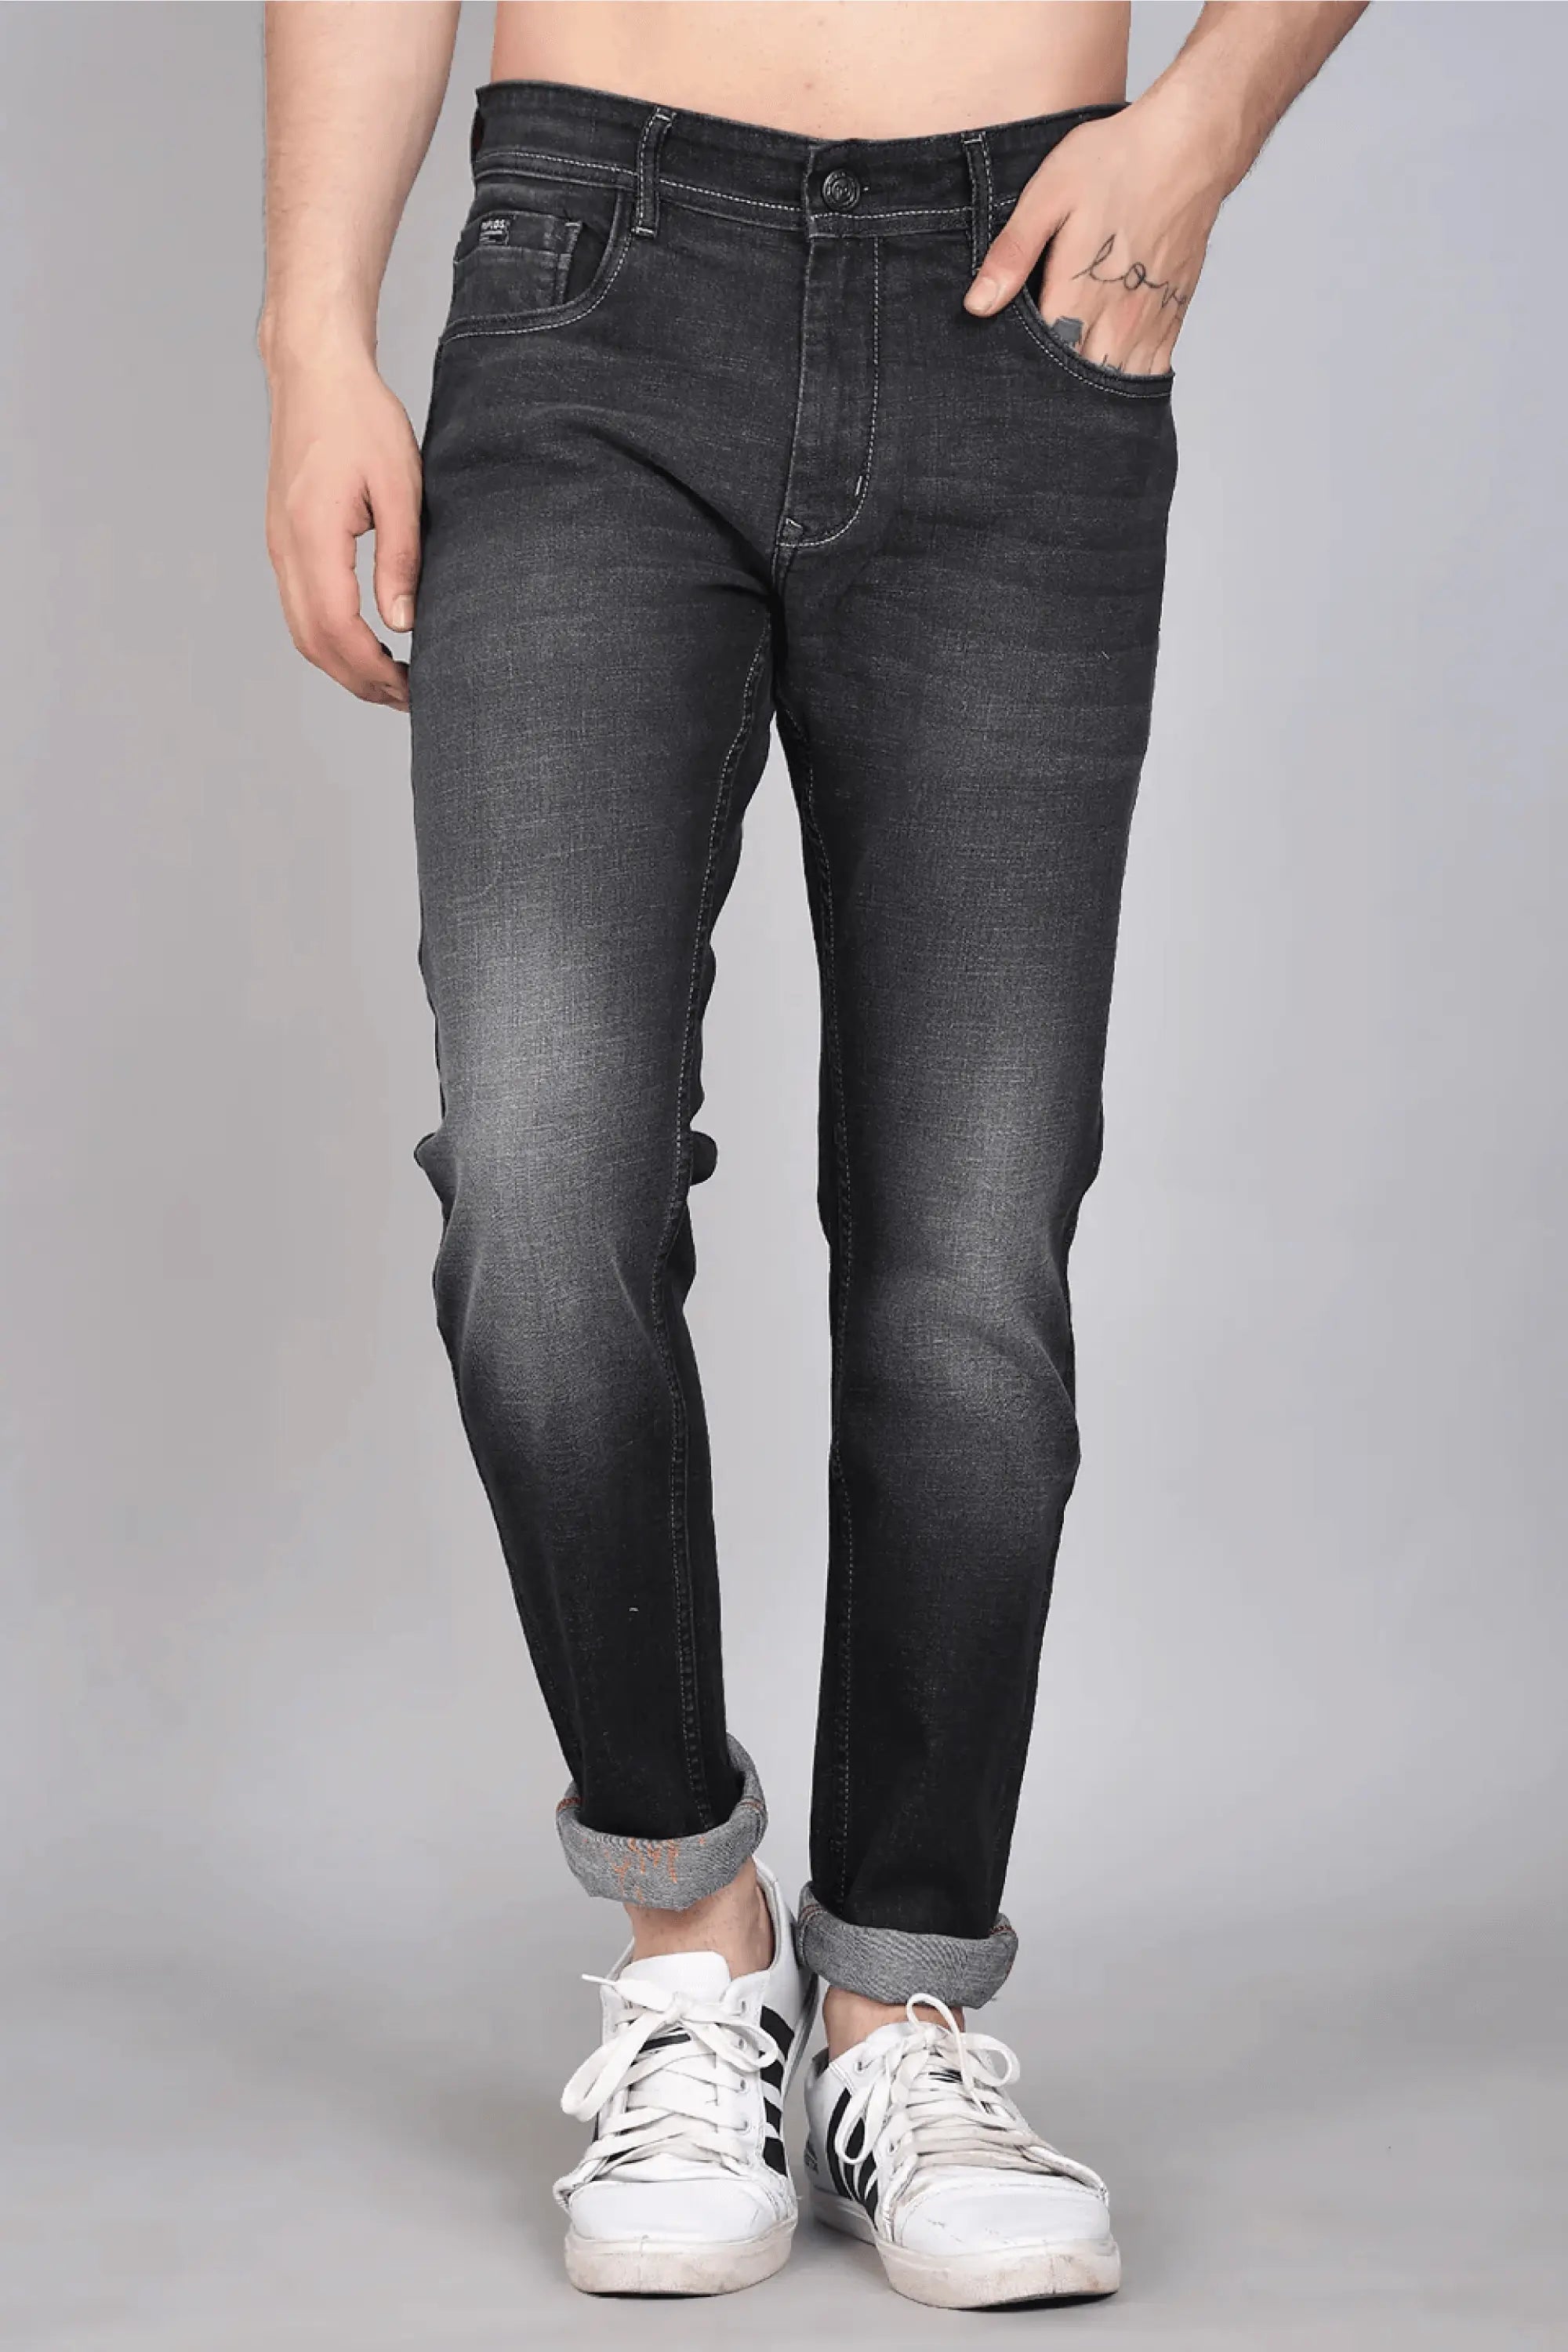 Skinny Ladies State pattern 1 Button Black Denim Jeans, Bottom at Rs  365/piece in New Delhi